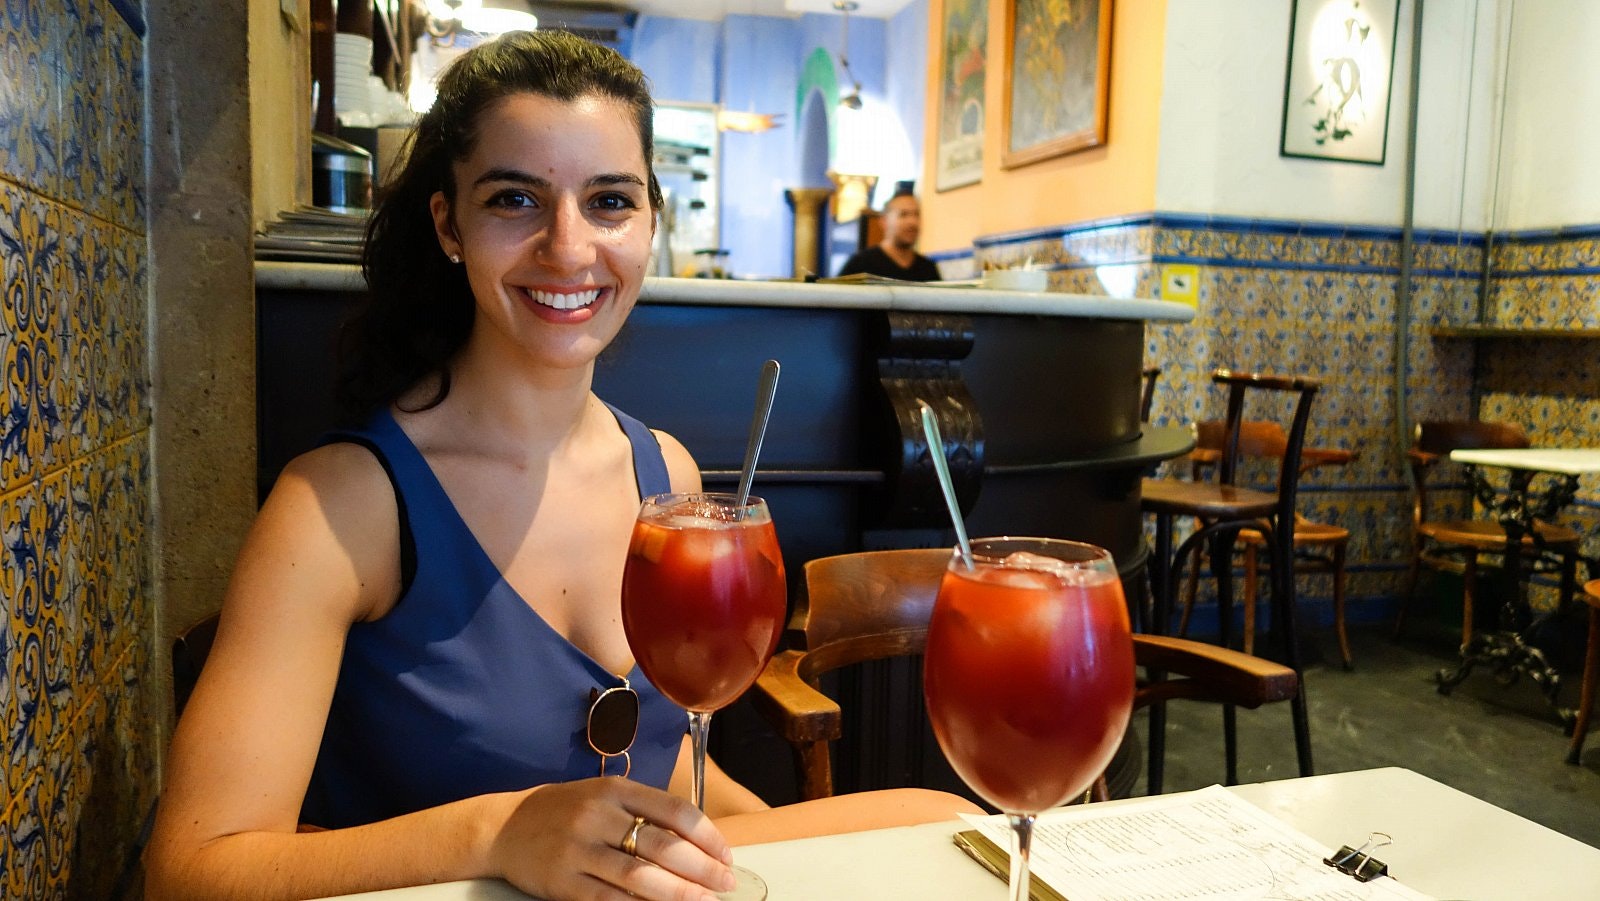 Caterina sits in a bar with tiled walls in a traditional yellow, white and blue geometric design; two full glasses of sangria are on the table in front of her.